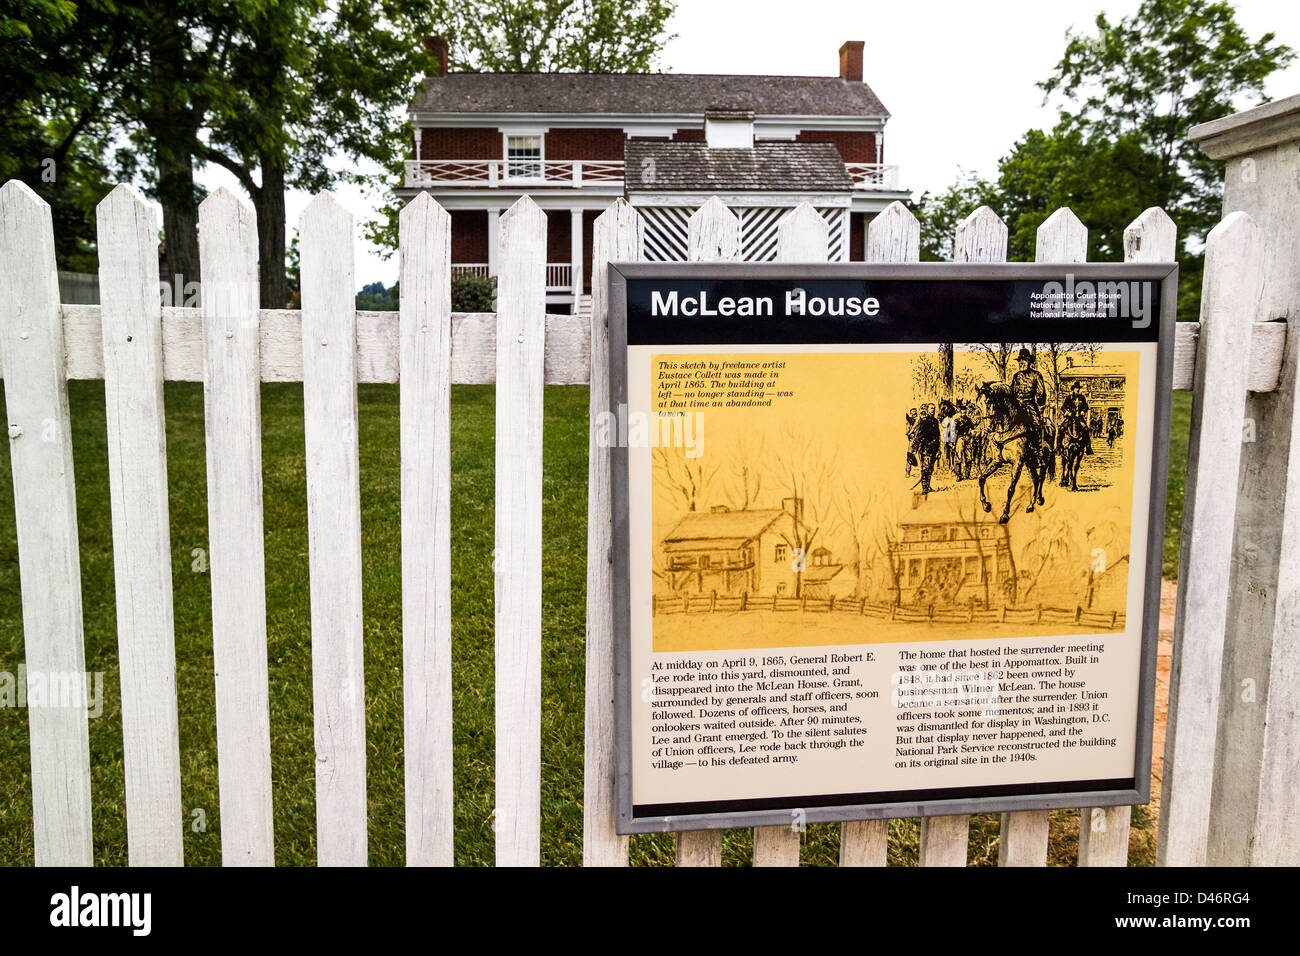 A National Park Service sign describes the historic McLean House near Appomattox, Virginia, USA, where the U.S. Civil War officially ended in 1865. Stock Photo